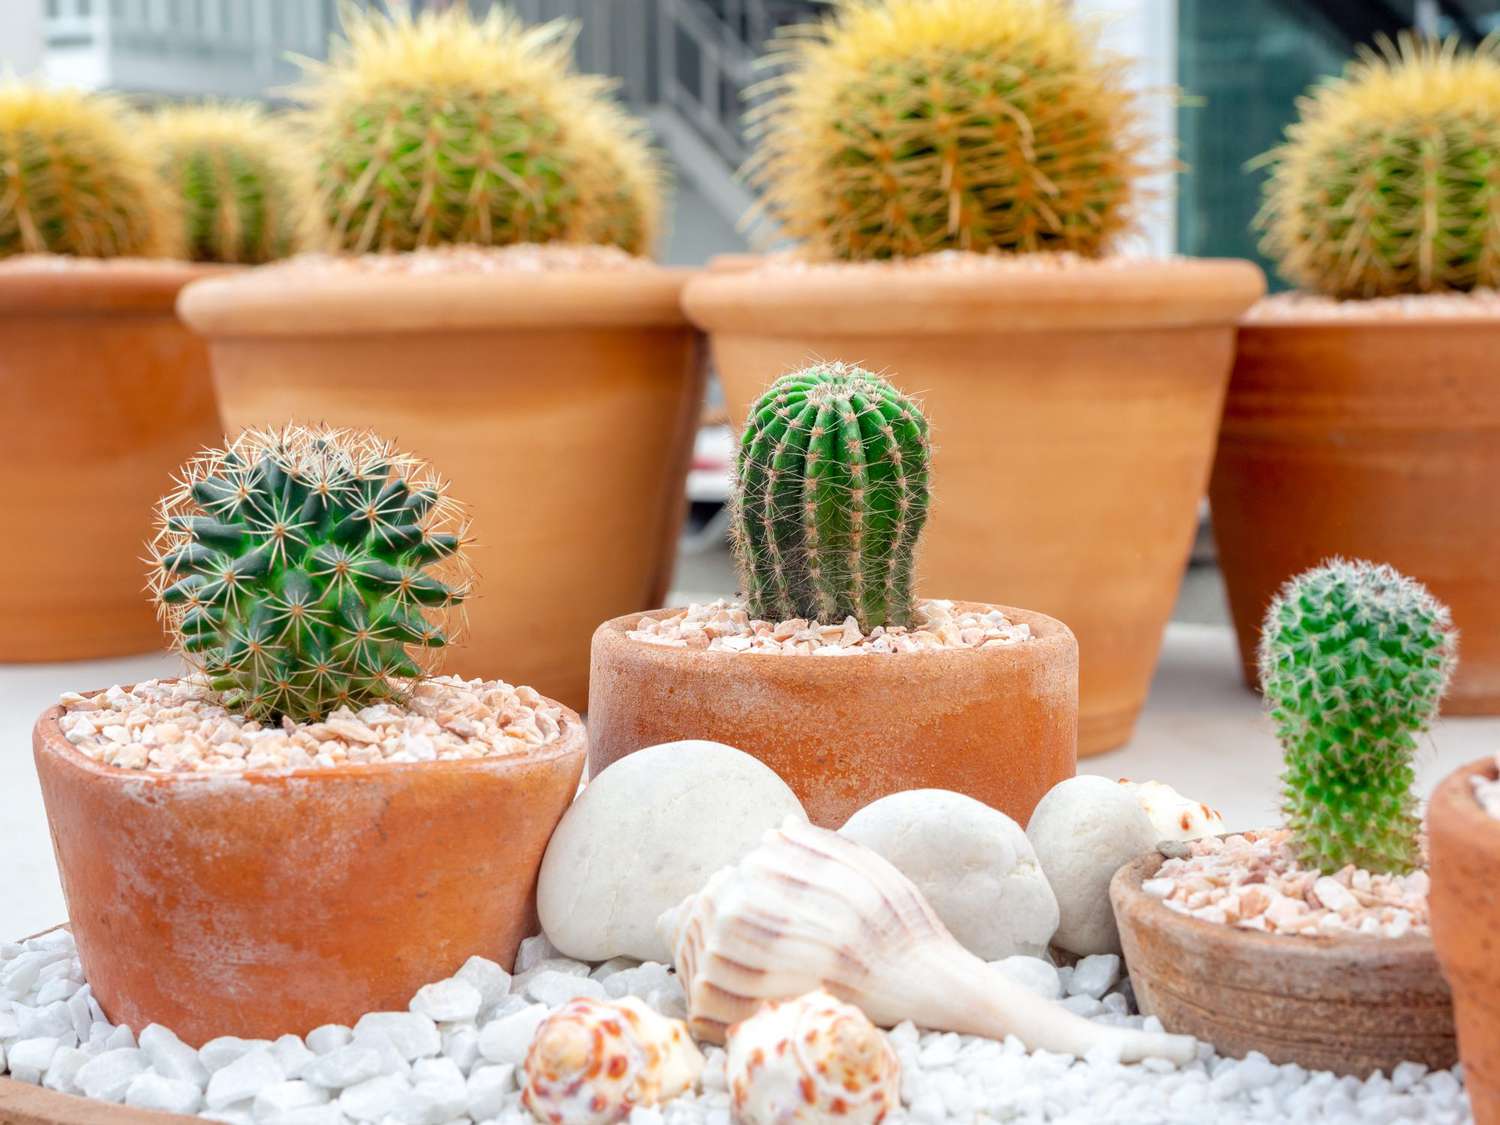 Green fresh cactus in pot with shells